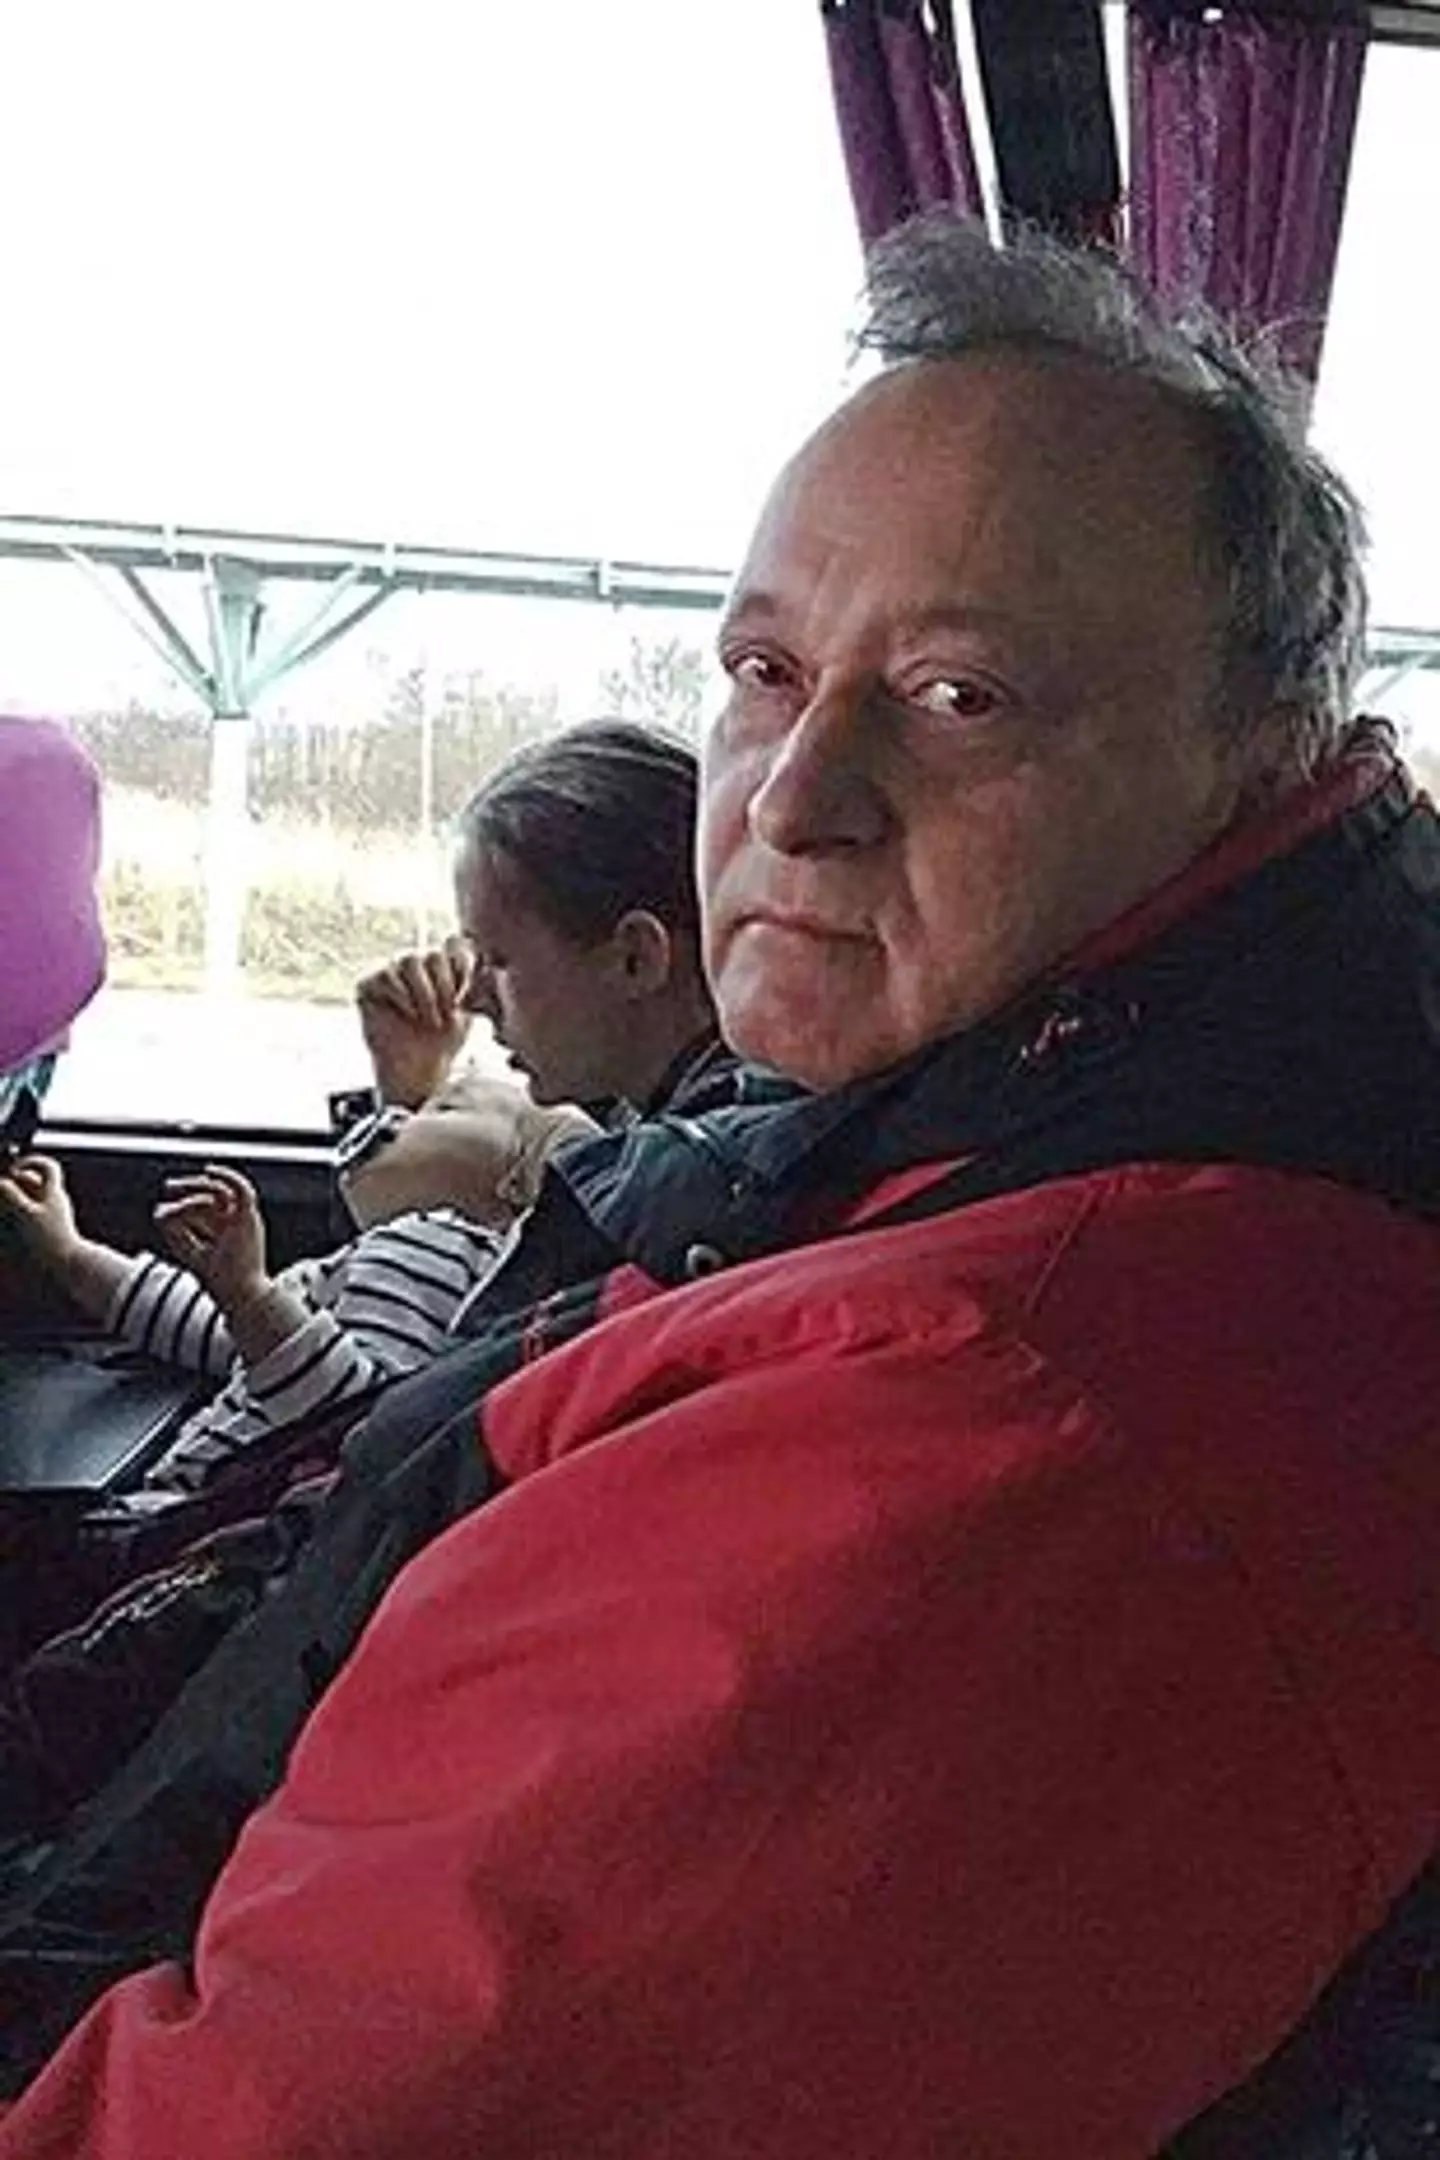 Alexai Ananenko is forced to flee Russia with his wife amid Russia's ongoing invasion. (East2West News)